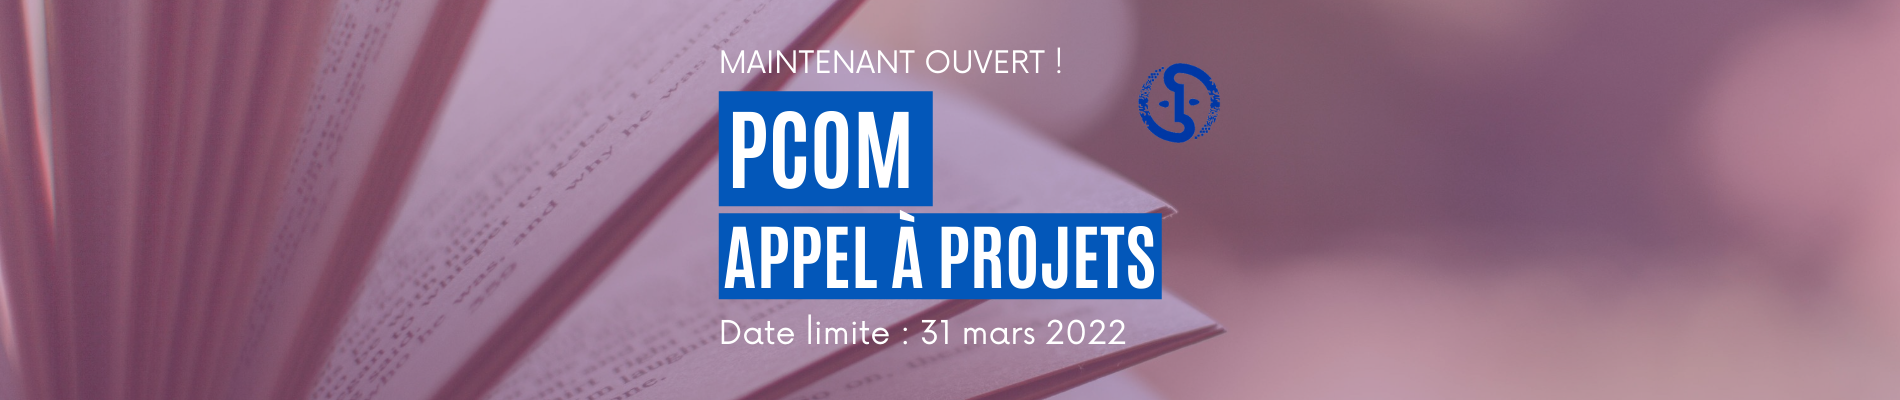 2022_pcom_call_for_projects_open_fr